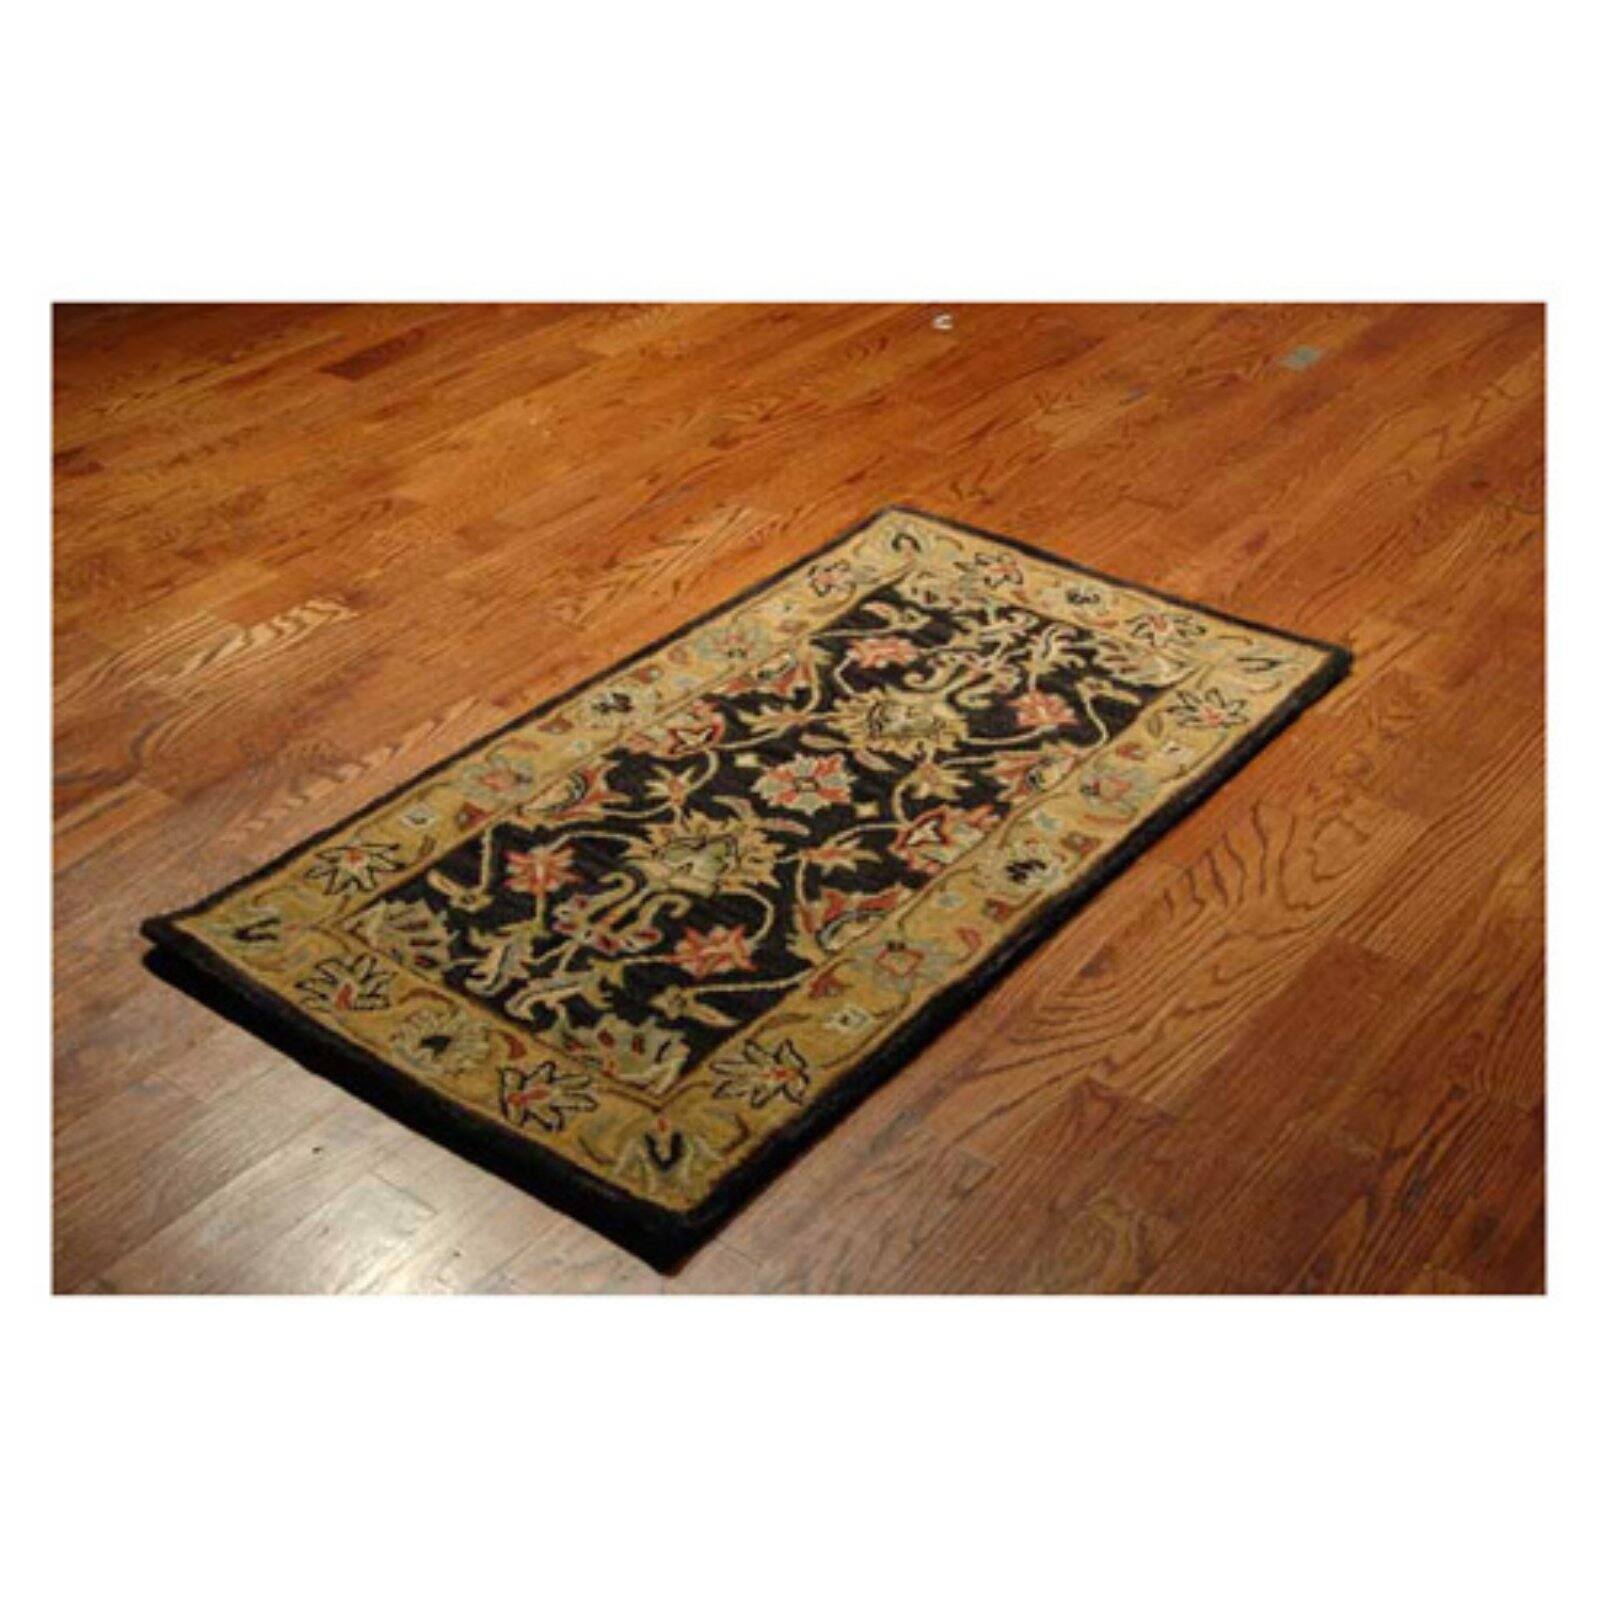 SAFAVIEH Heritage Regis Traditional Wool Area Rug, Charcoal/Gold, 3' x 5' - image 2 of 10